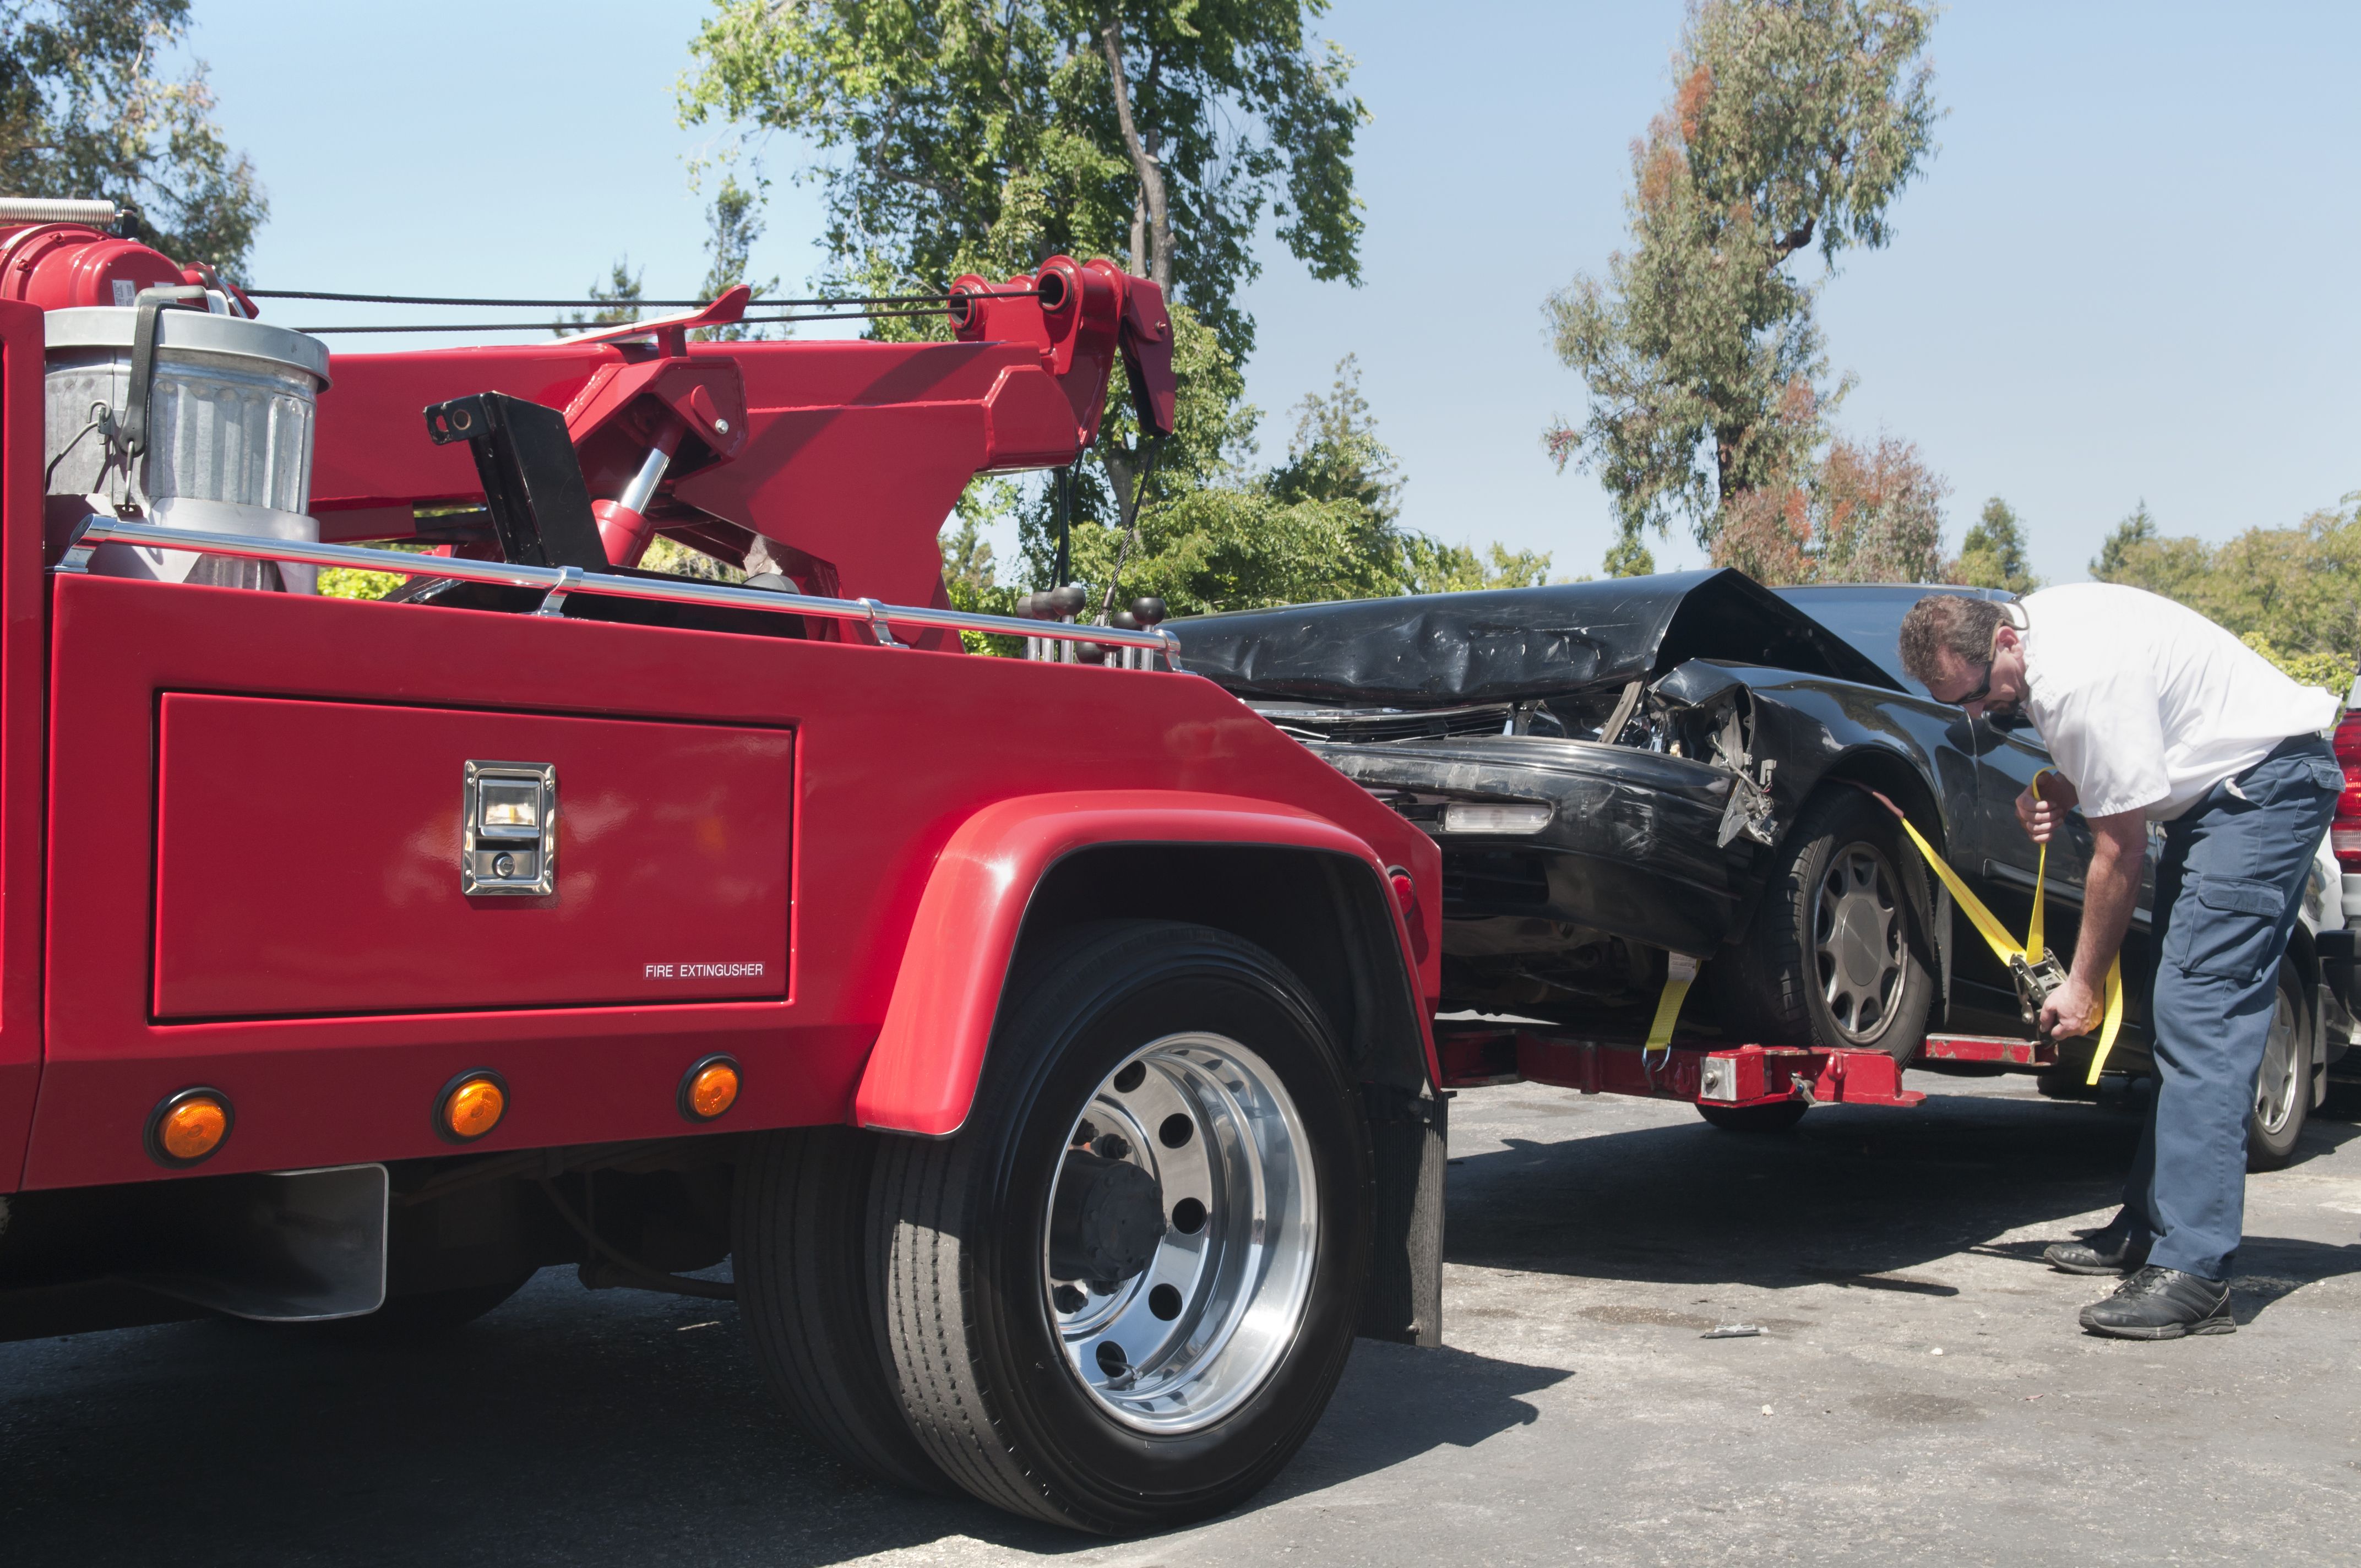 Towing Service Fairfield Ca